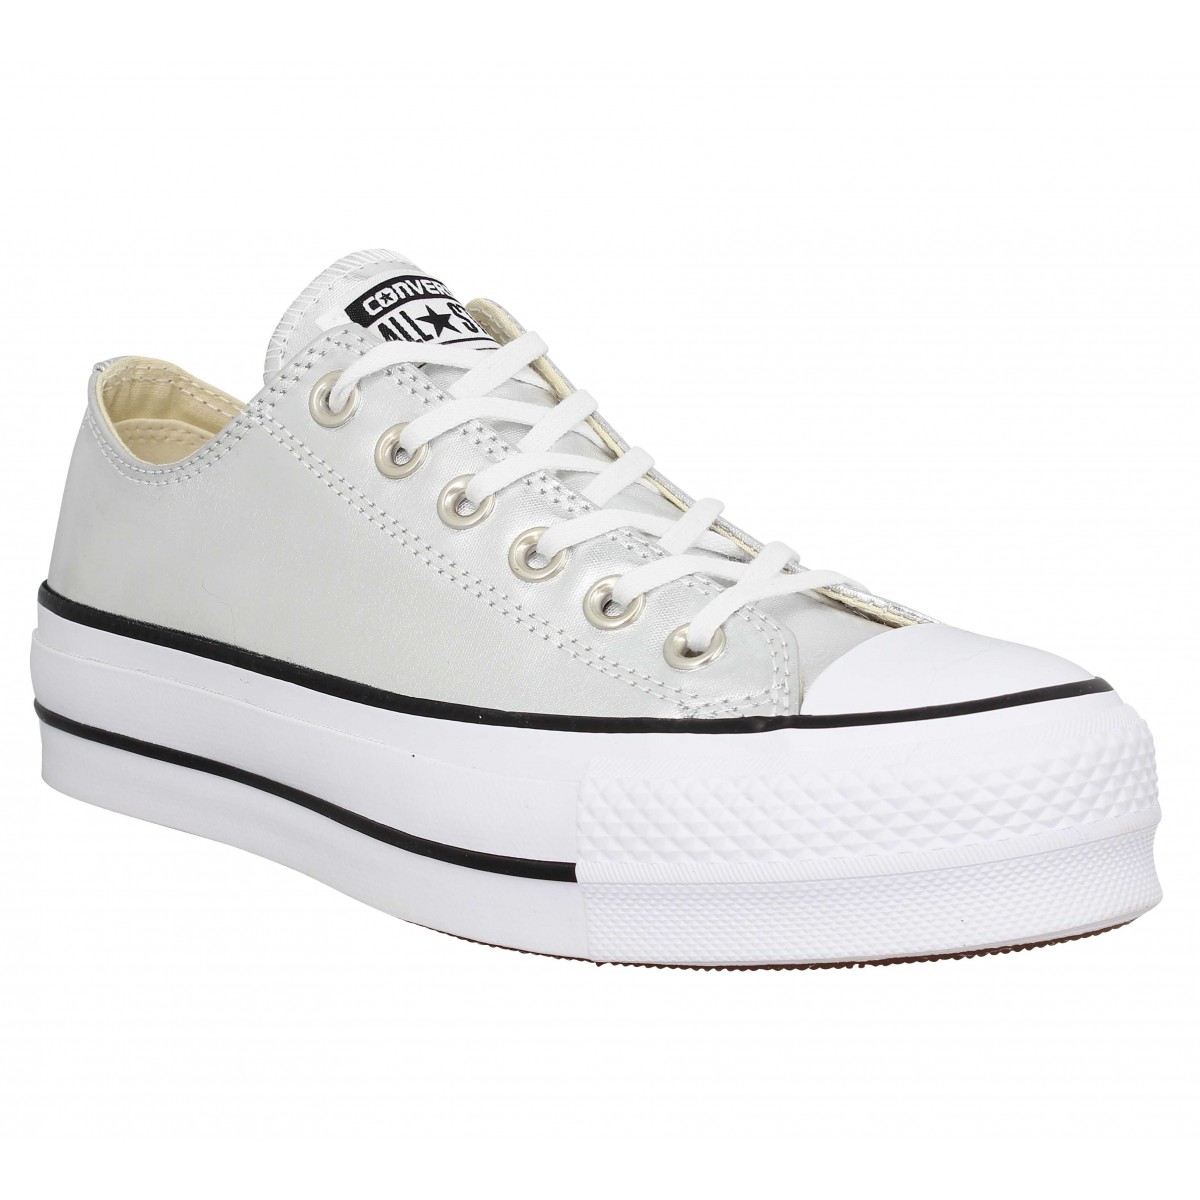 Chaussures Converse chuck taylor all star lift toile femme argent ...